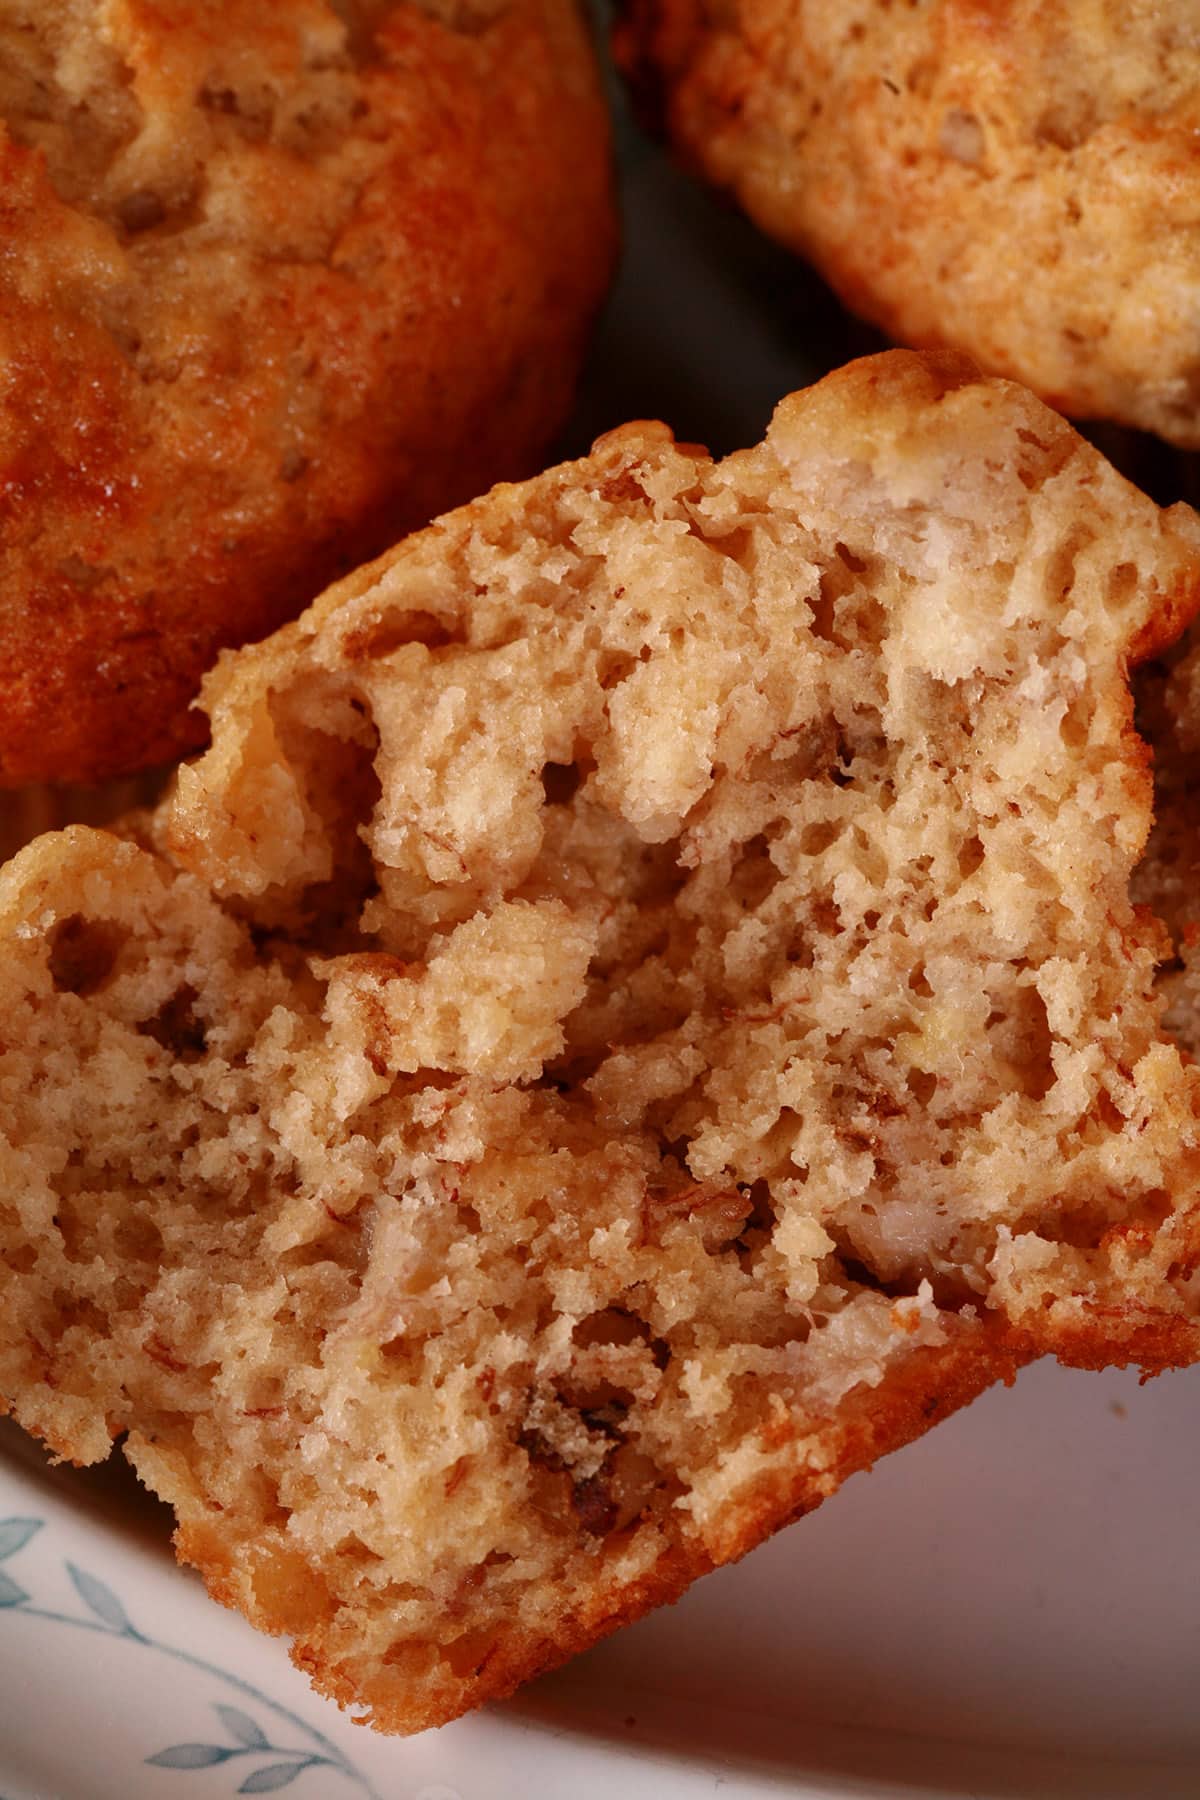 A close up view of half of a banana nut muffin.